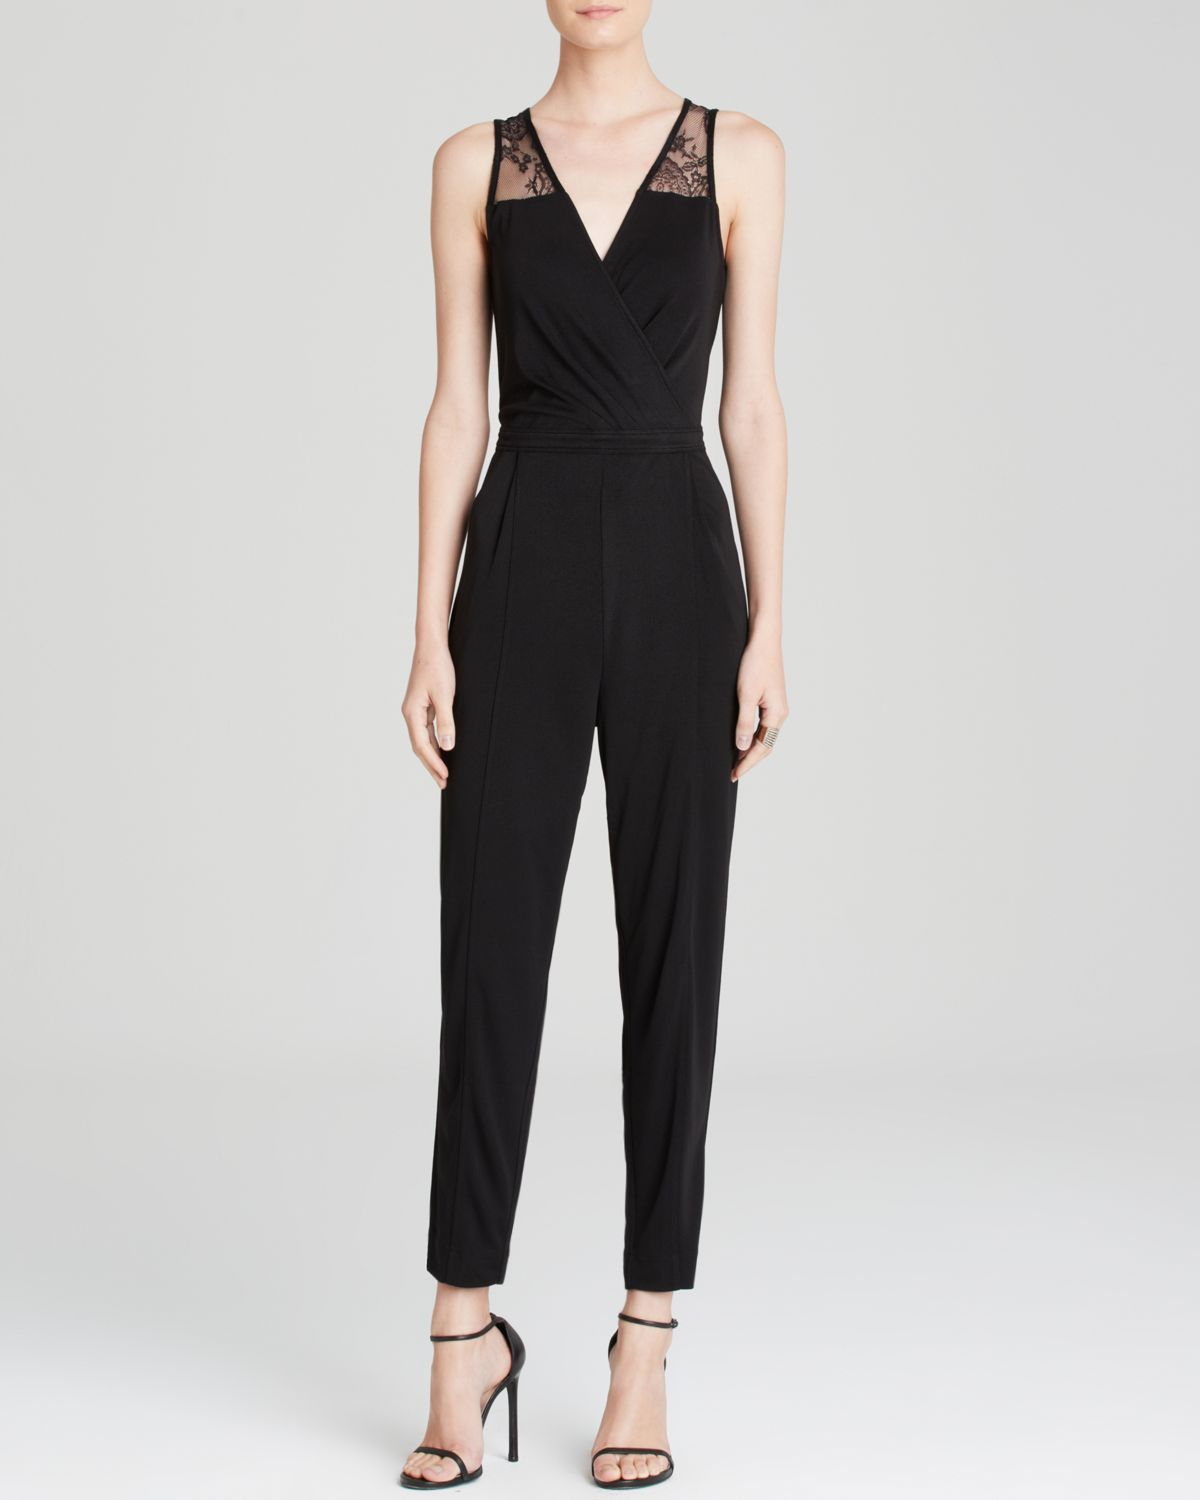 French Connection Jumpsuit - Liza Crepe in Black - Lyst